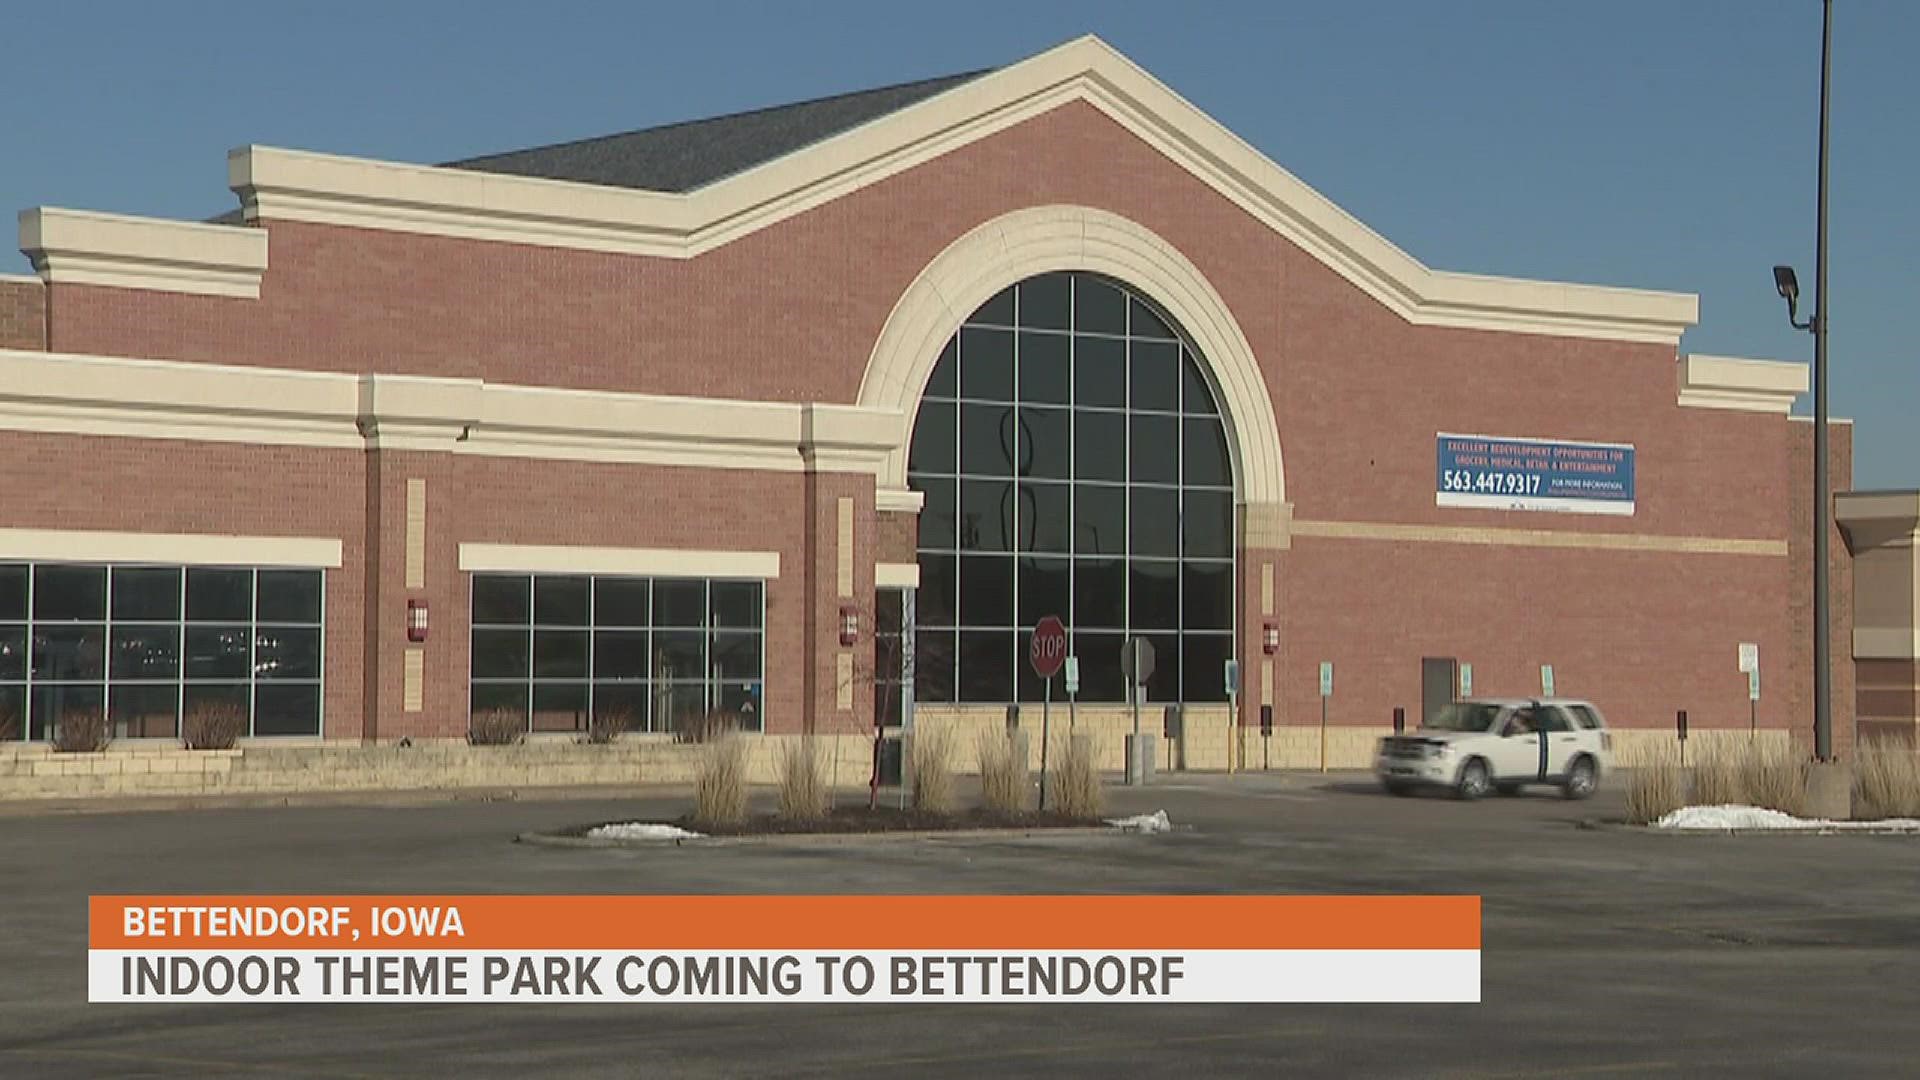 The old Schnucks store in Bettendorf is being turned into an indoor theme park. It'll include go karts, bowling, mini golf, laser tag, a large kids zone and more.